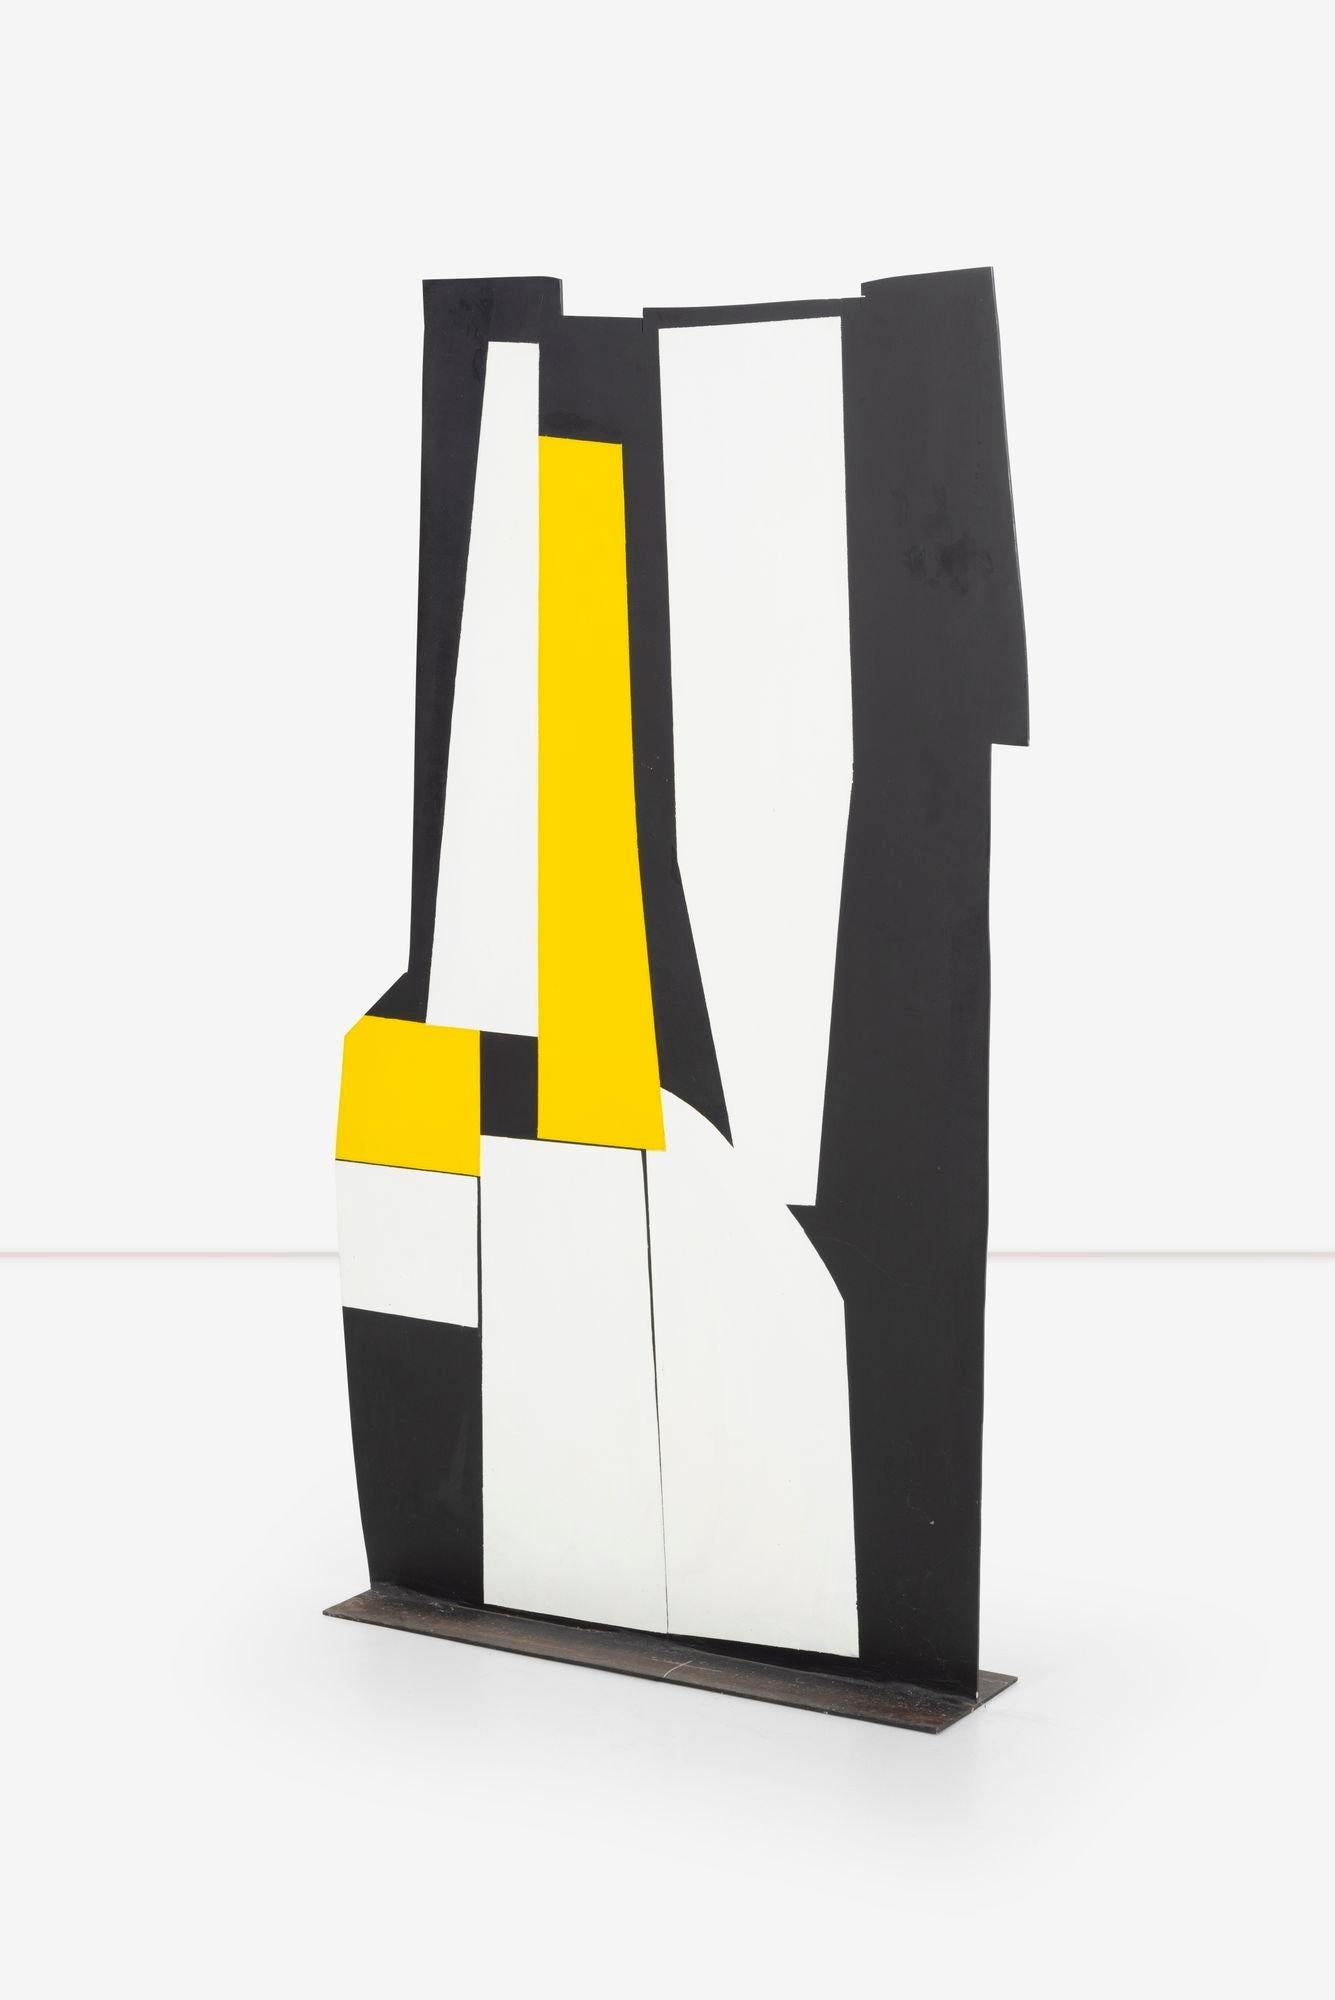 Tony Rosenthal Standing Black and White Plus Yellow Floor Sculpture In Good Condition For Sale In Chicago, IL